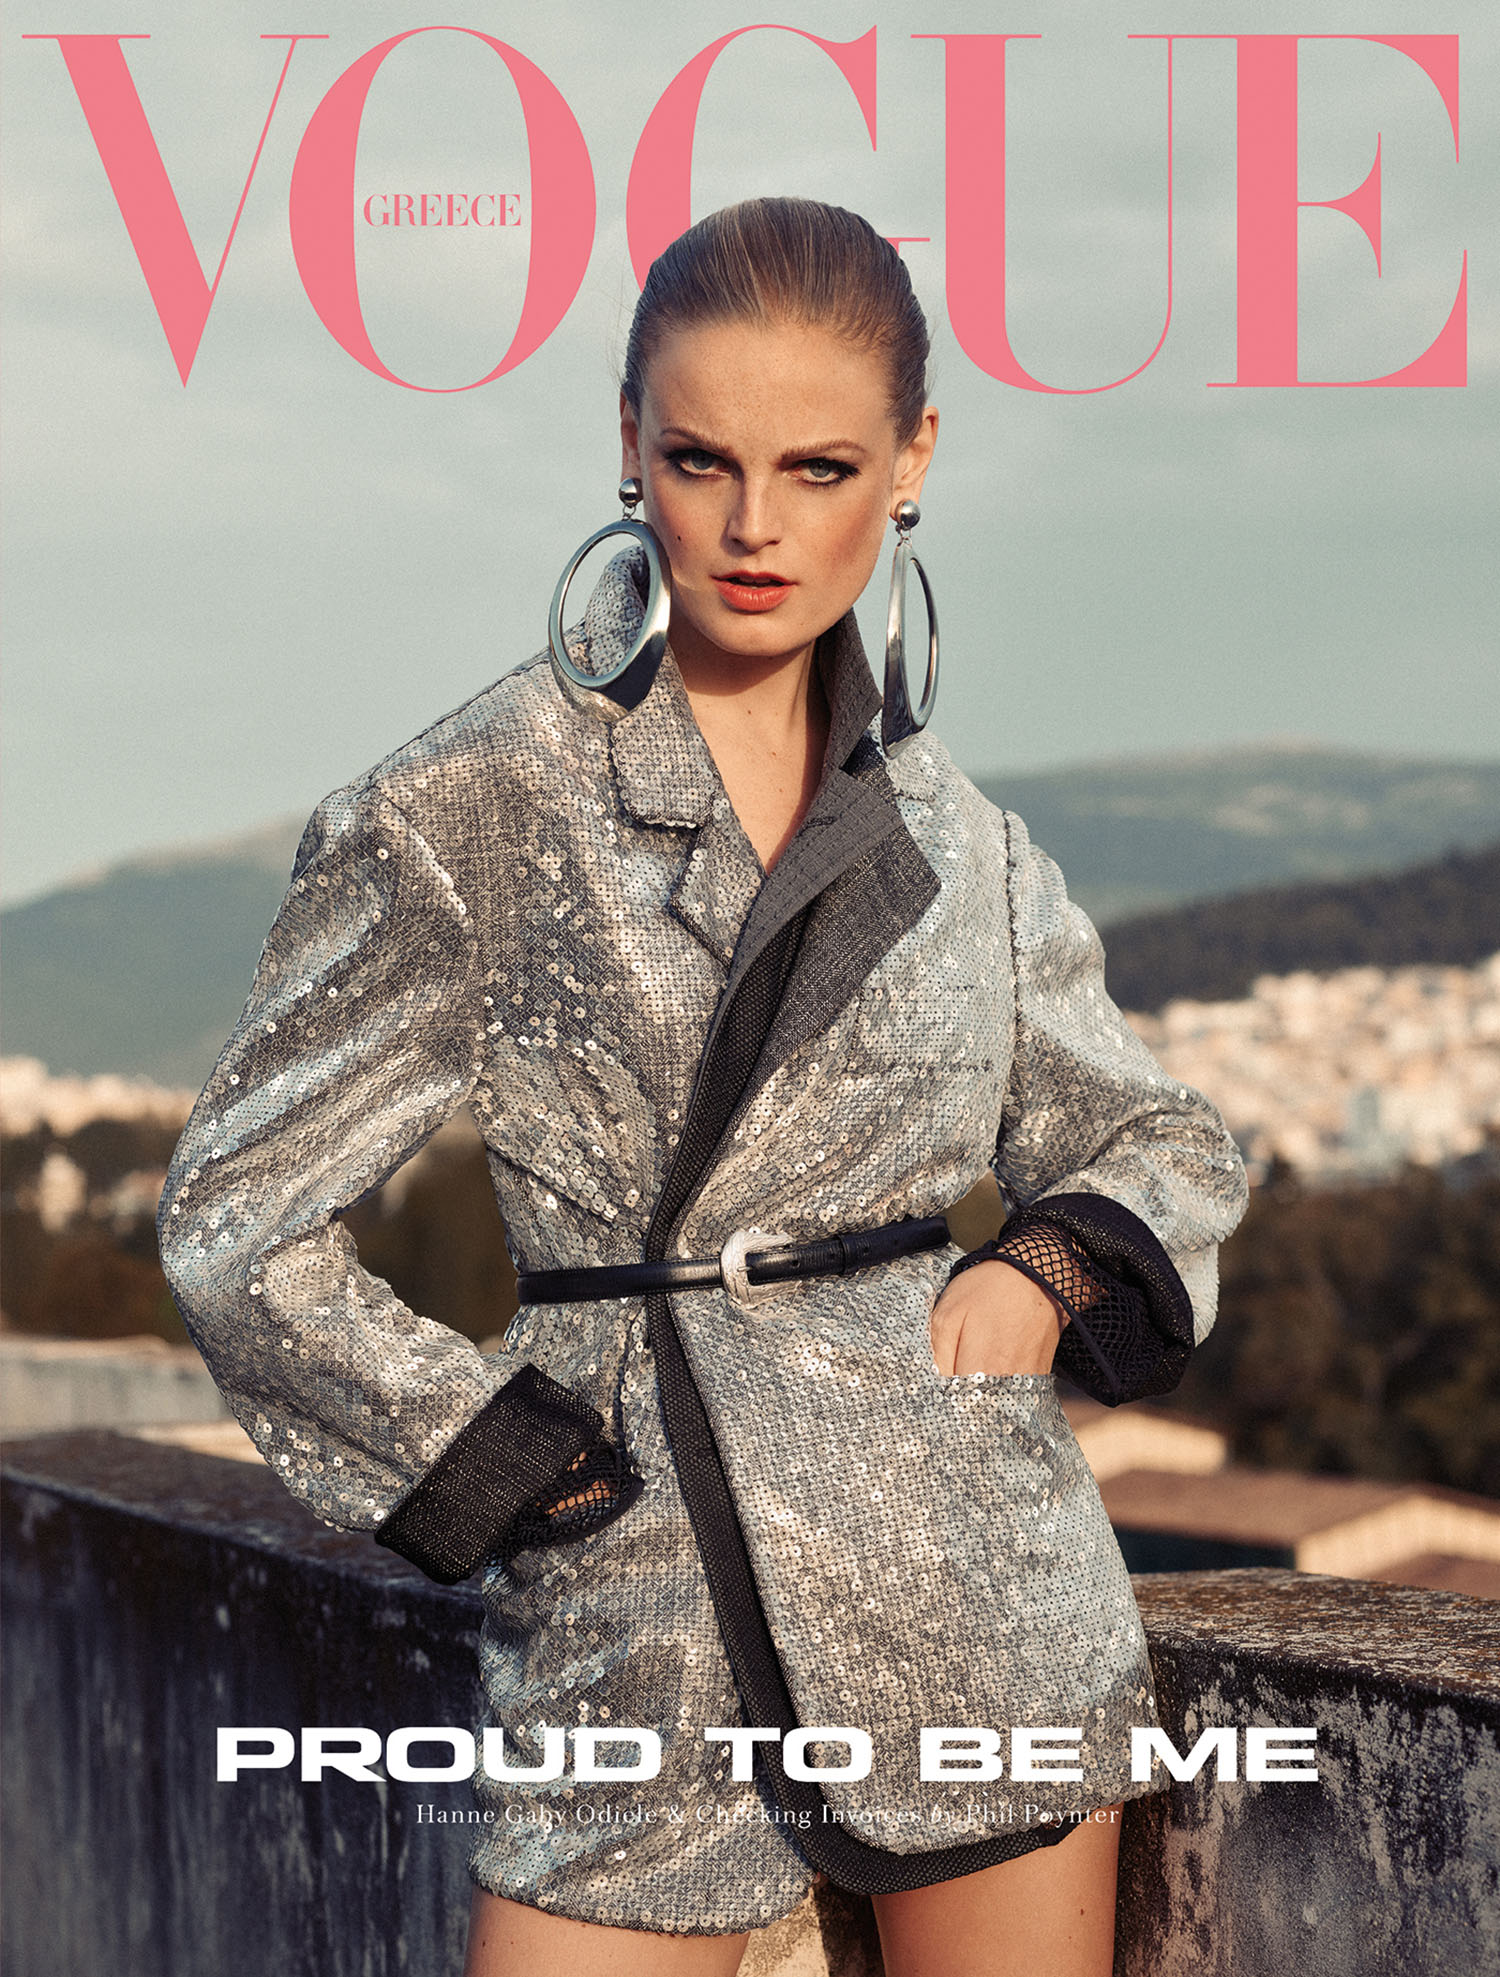 Hanne Gaby Odiele and Checking Invoices cover Vogue Greece June 2021 by Phil Poynter